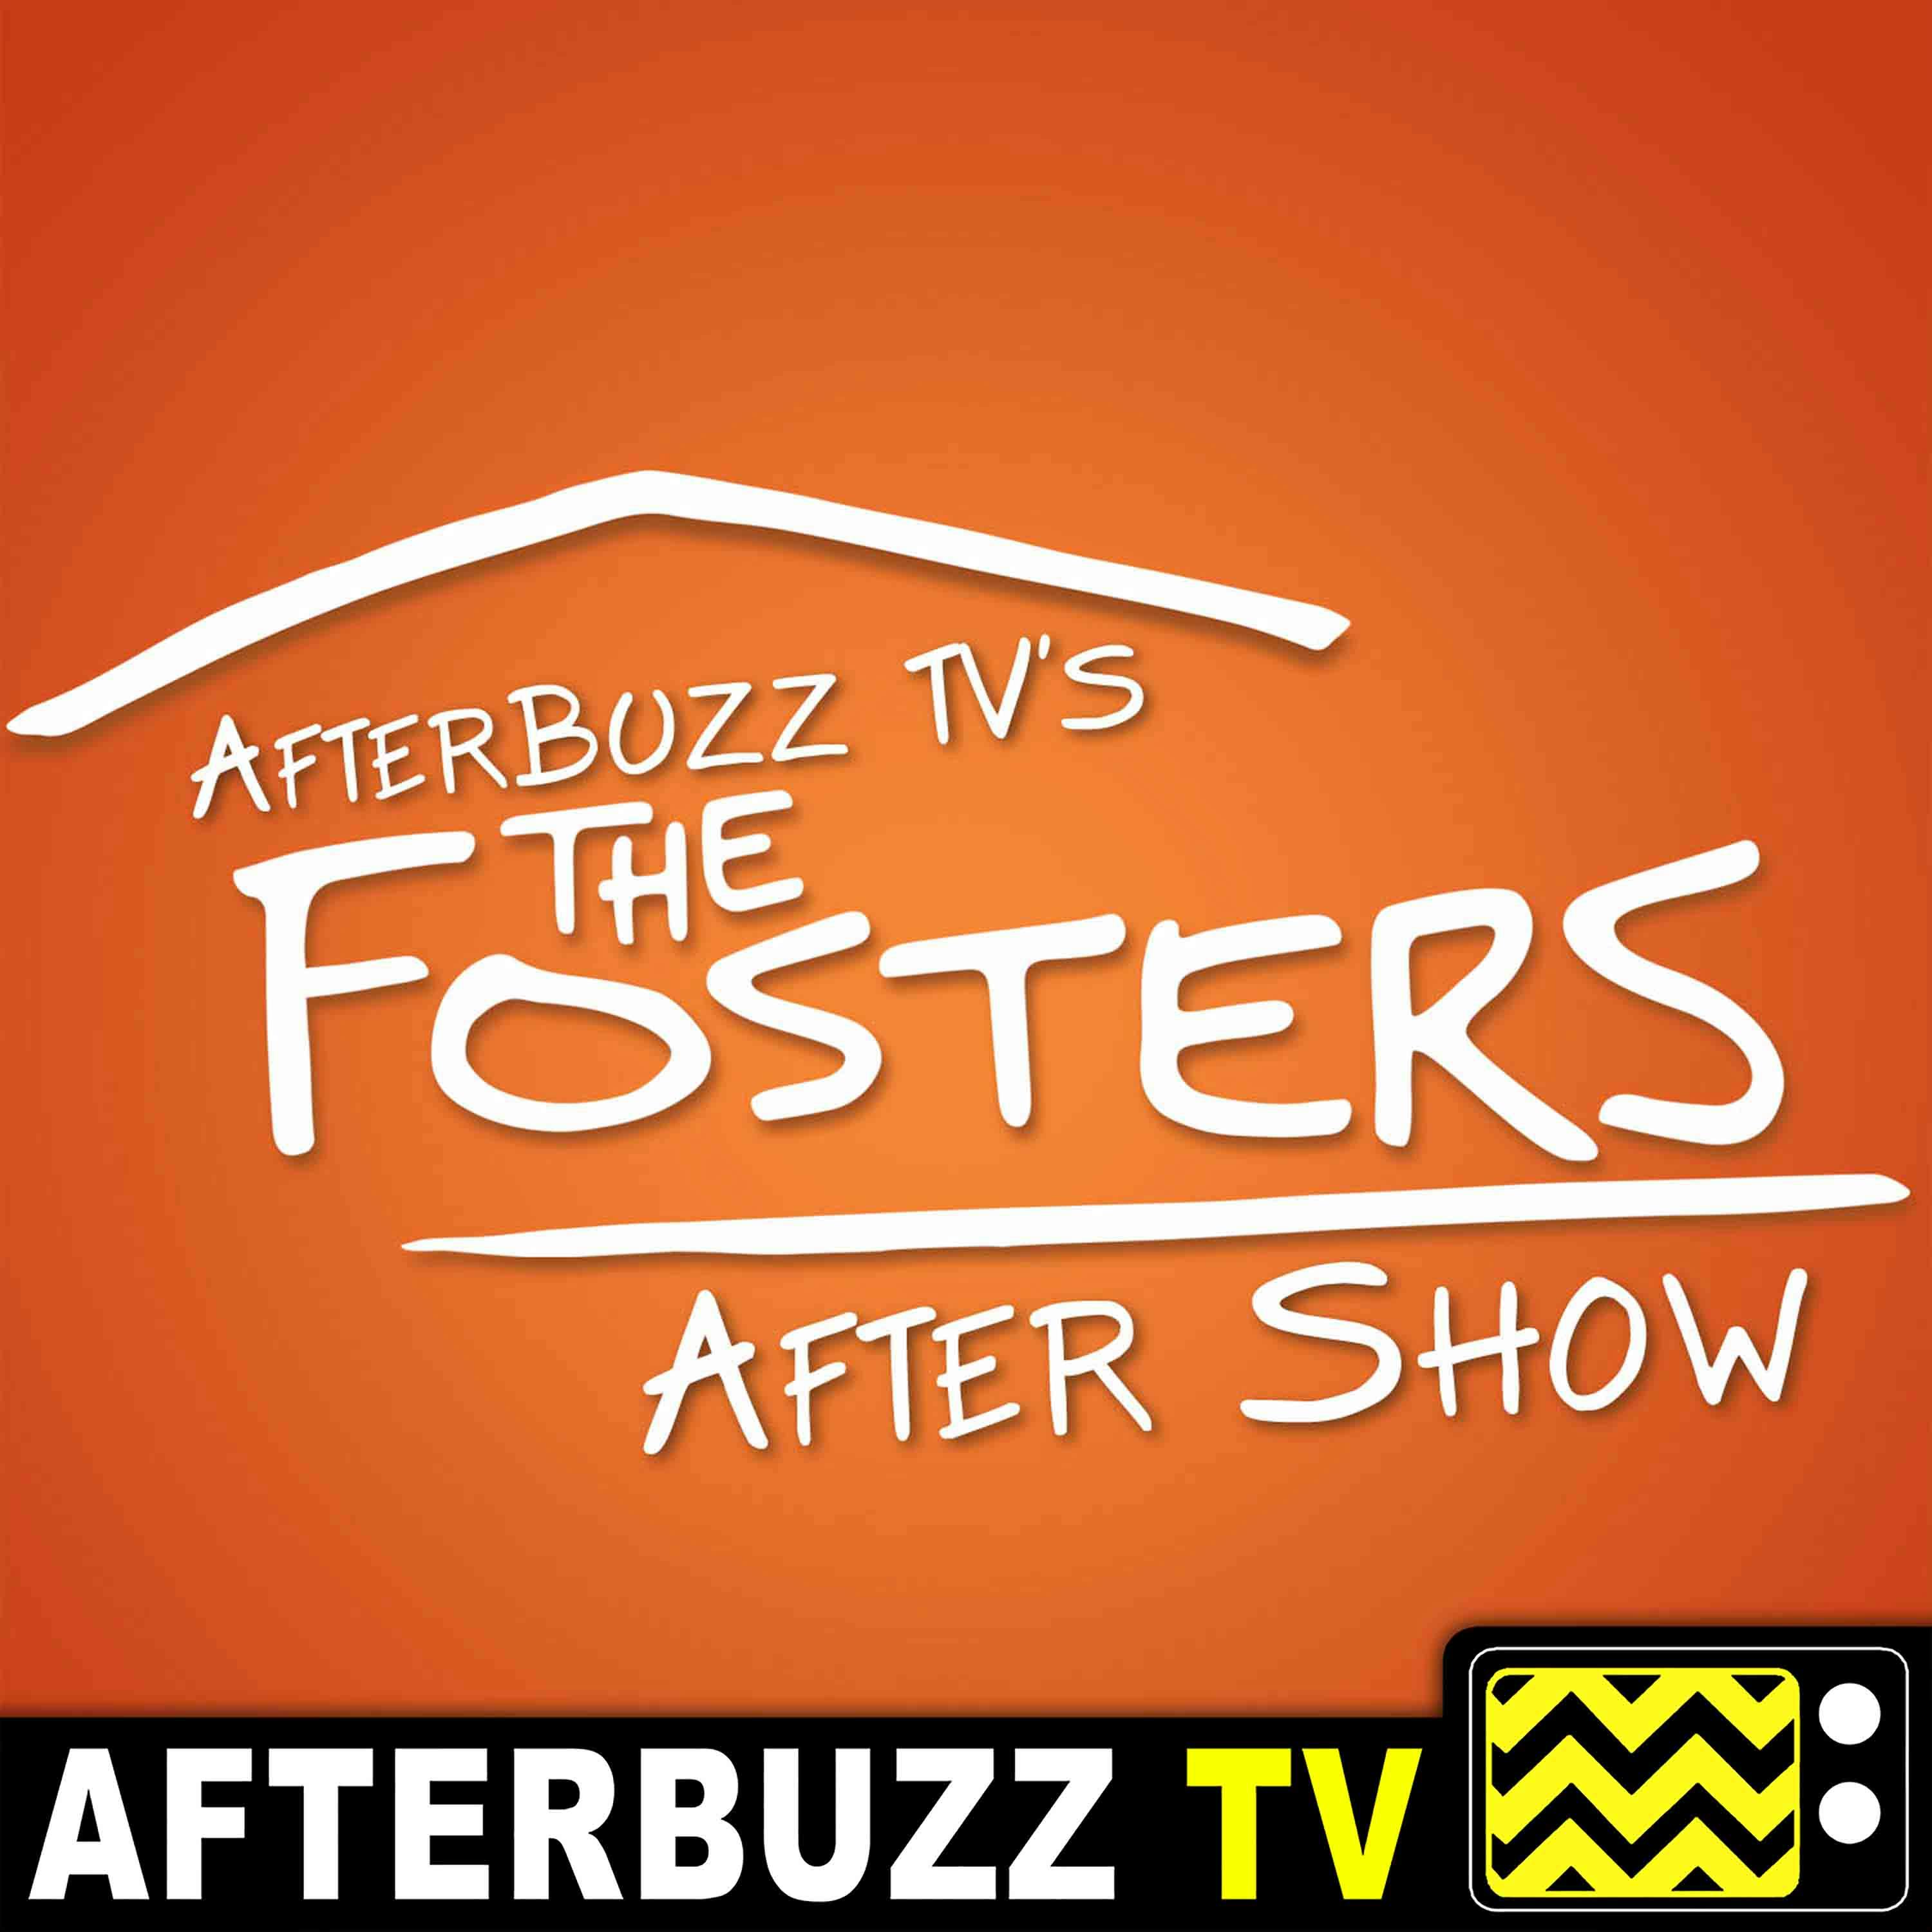 The Fosters S:3 | Jordan Rodrigues Guests on If and When E:13 | AfterBuzz TV AfterShow